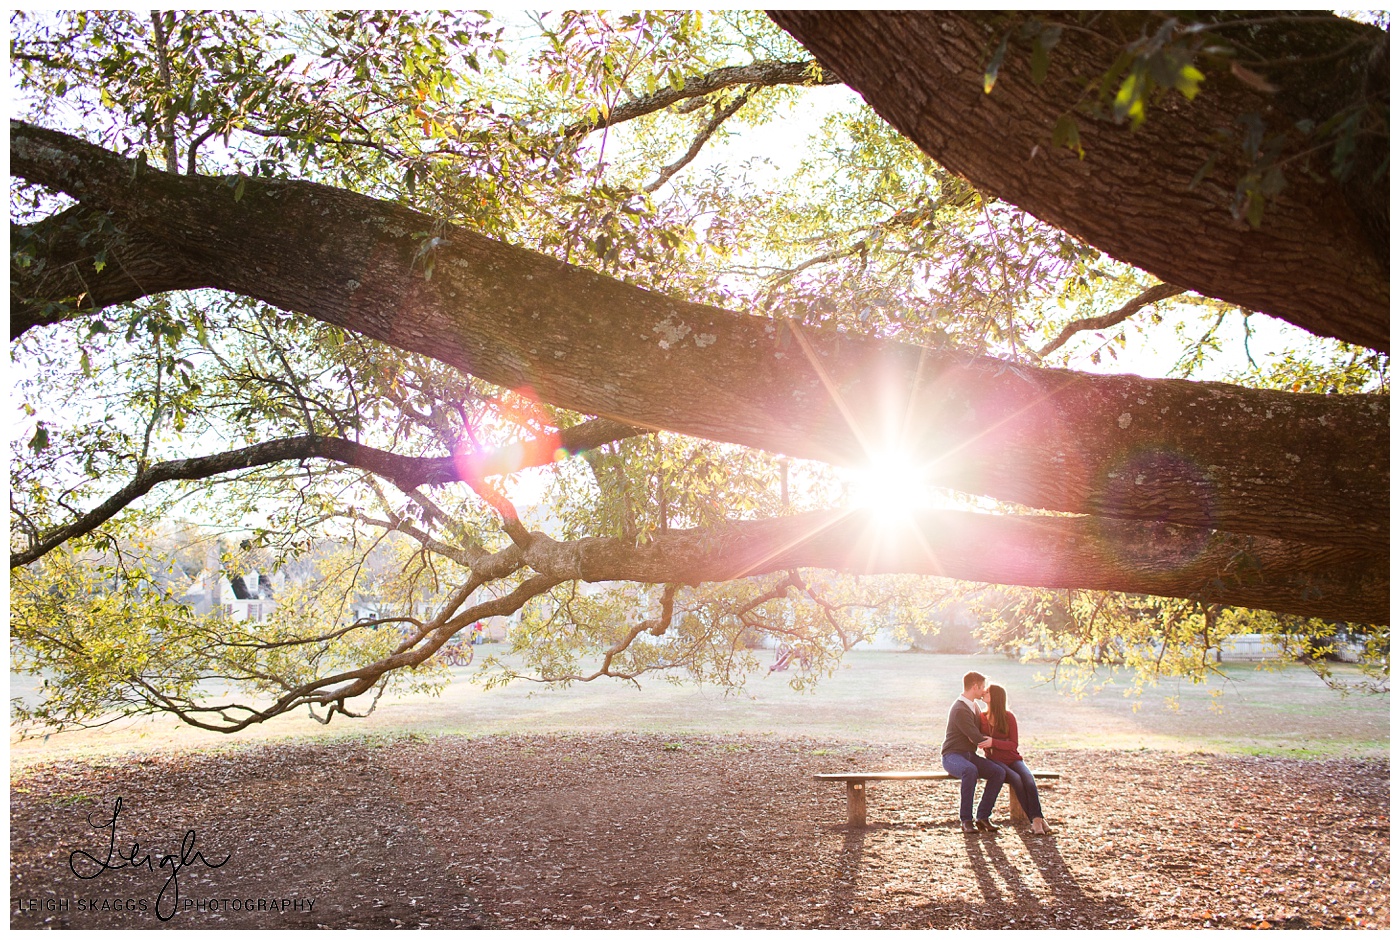 Colonial Williamsburg Virginia winter engagement session!